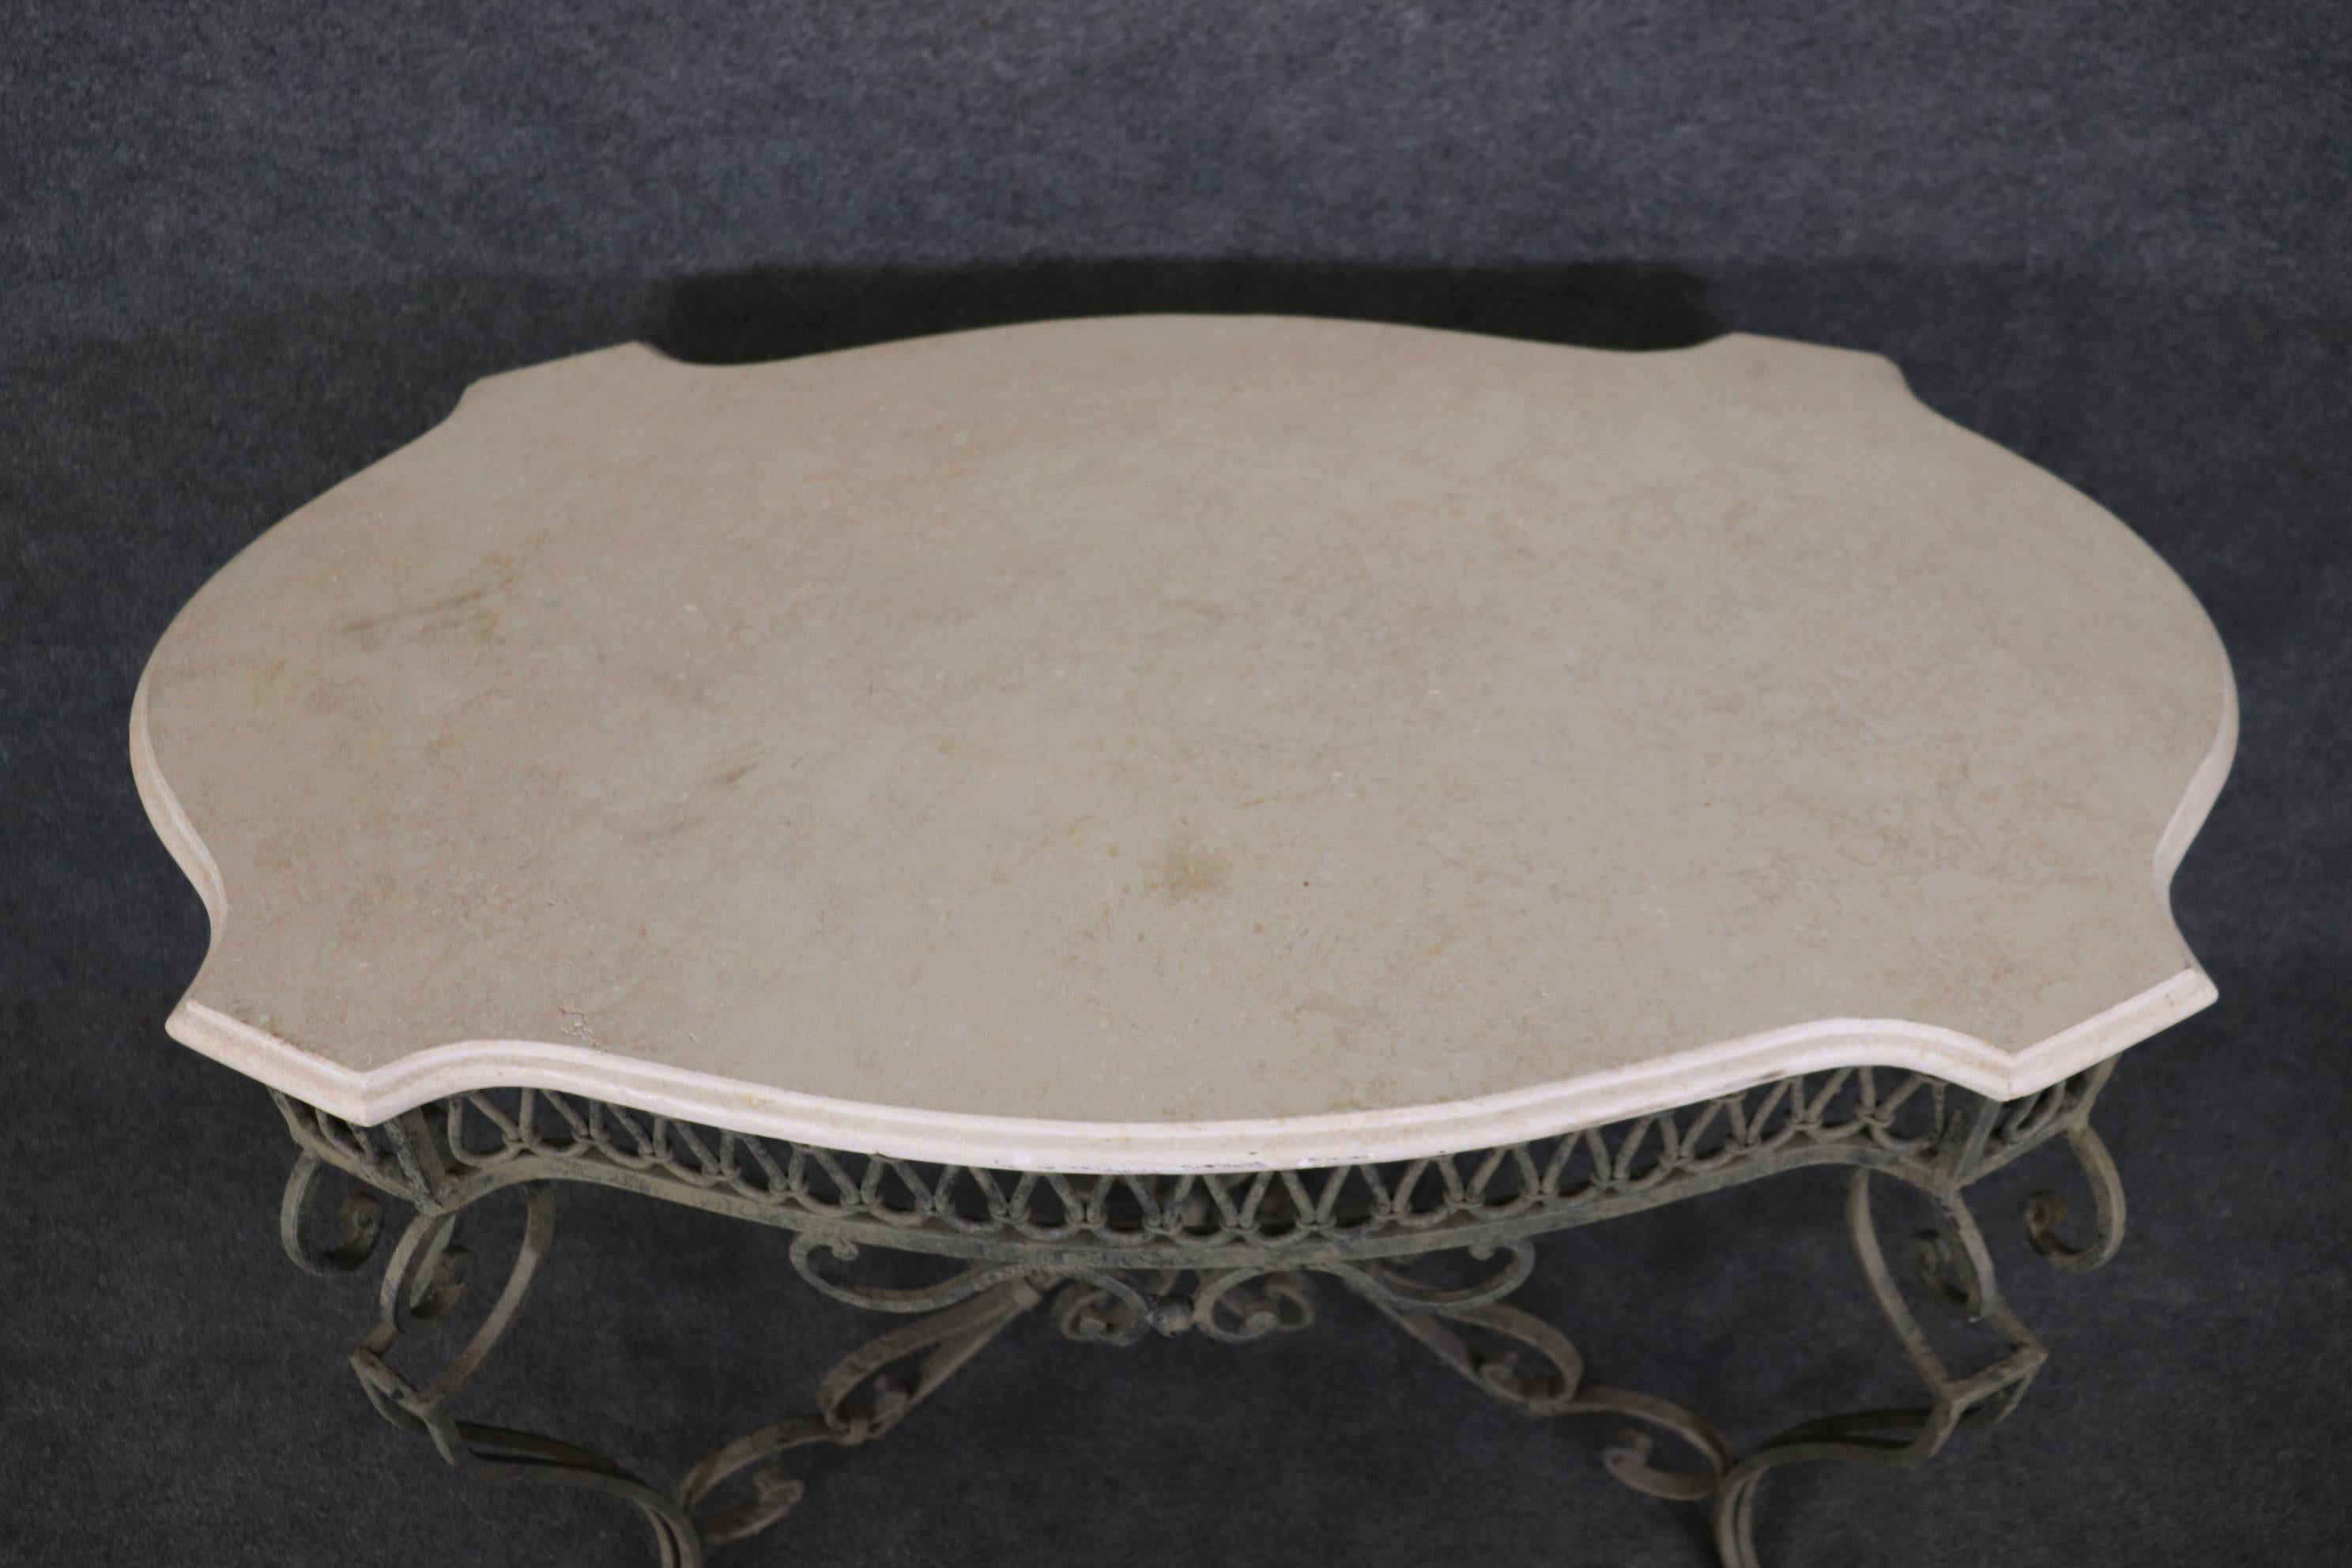 Carved Wrought Iron Regency Style Travertine Top Center Table For Sale